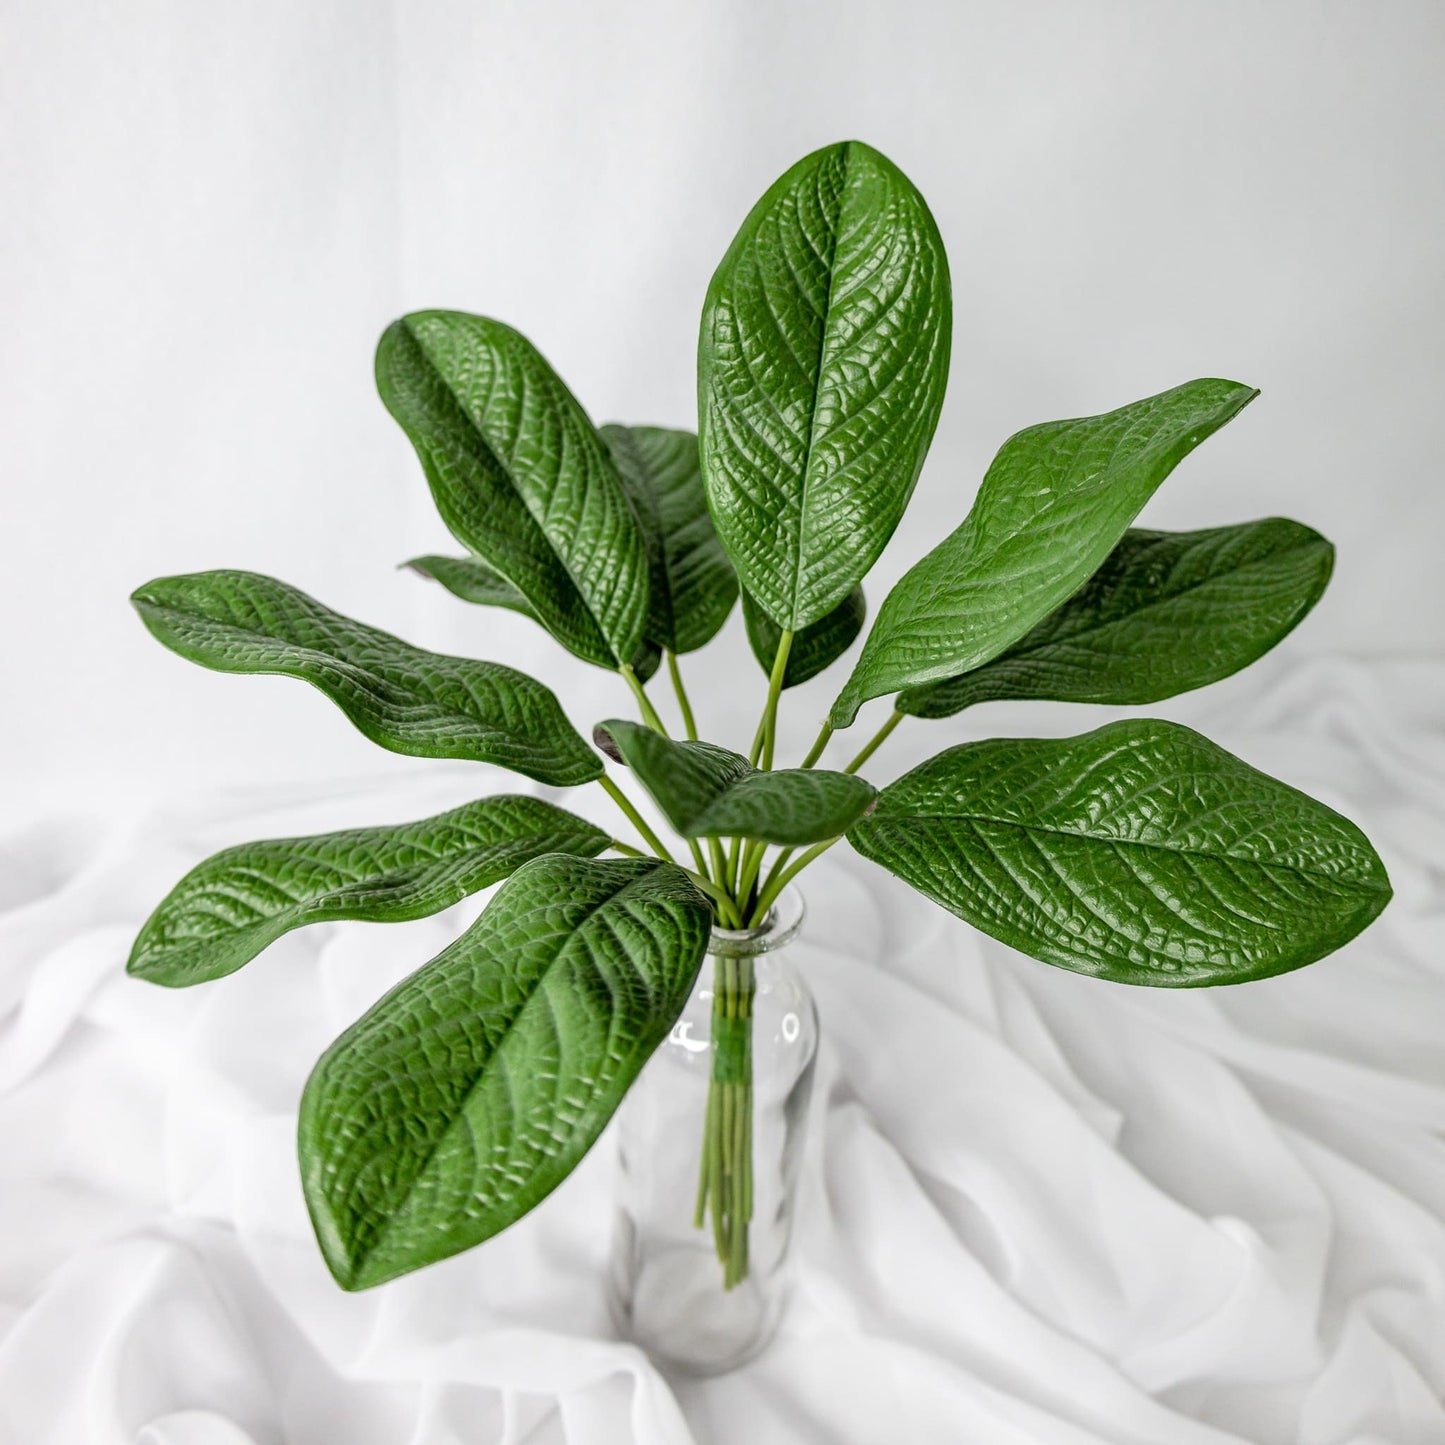 artificial small magnolia leaves placed in transparent glass vase